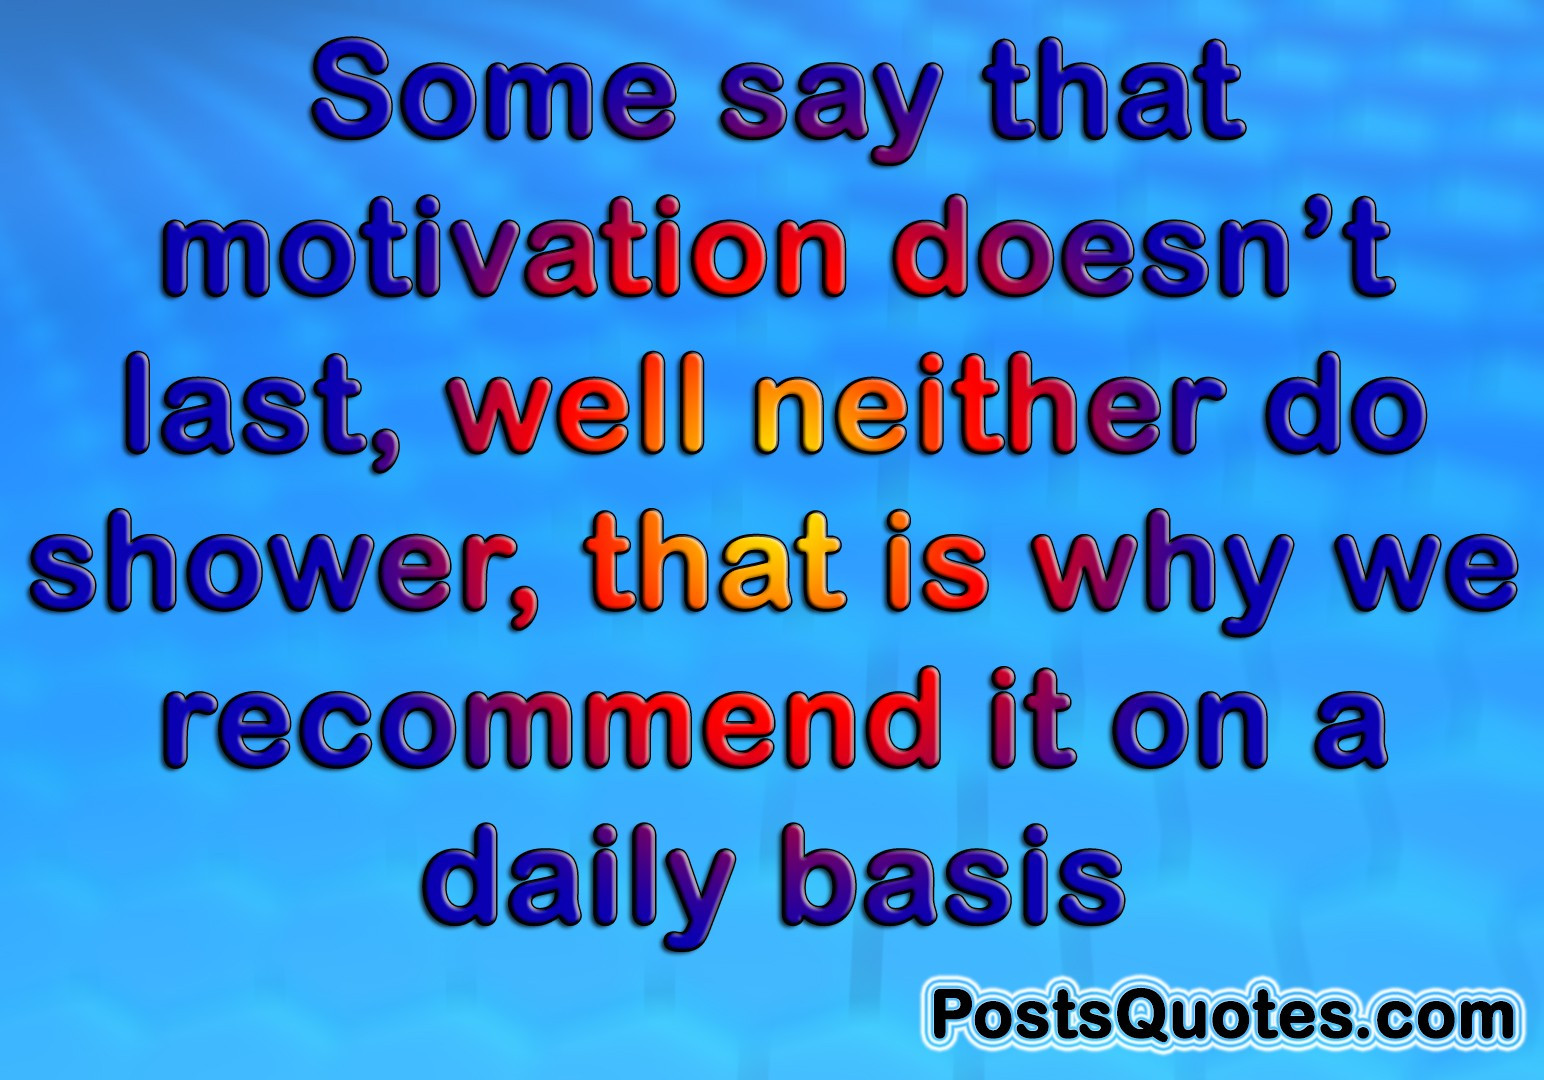 Daily Motivational Quote
 Daily Motivational Quotes Posts Quotes